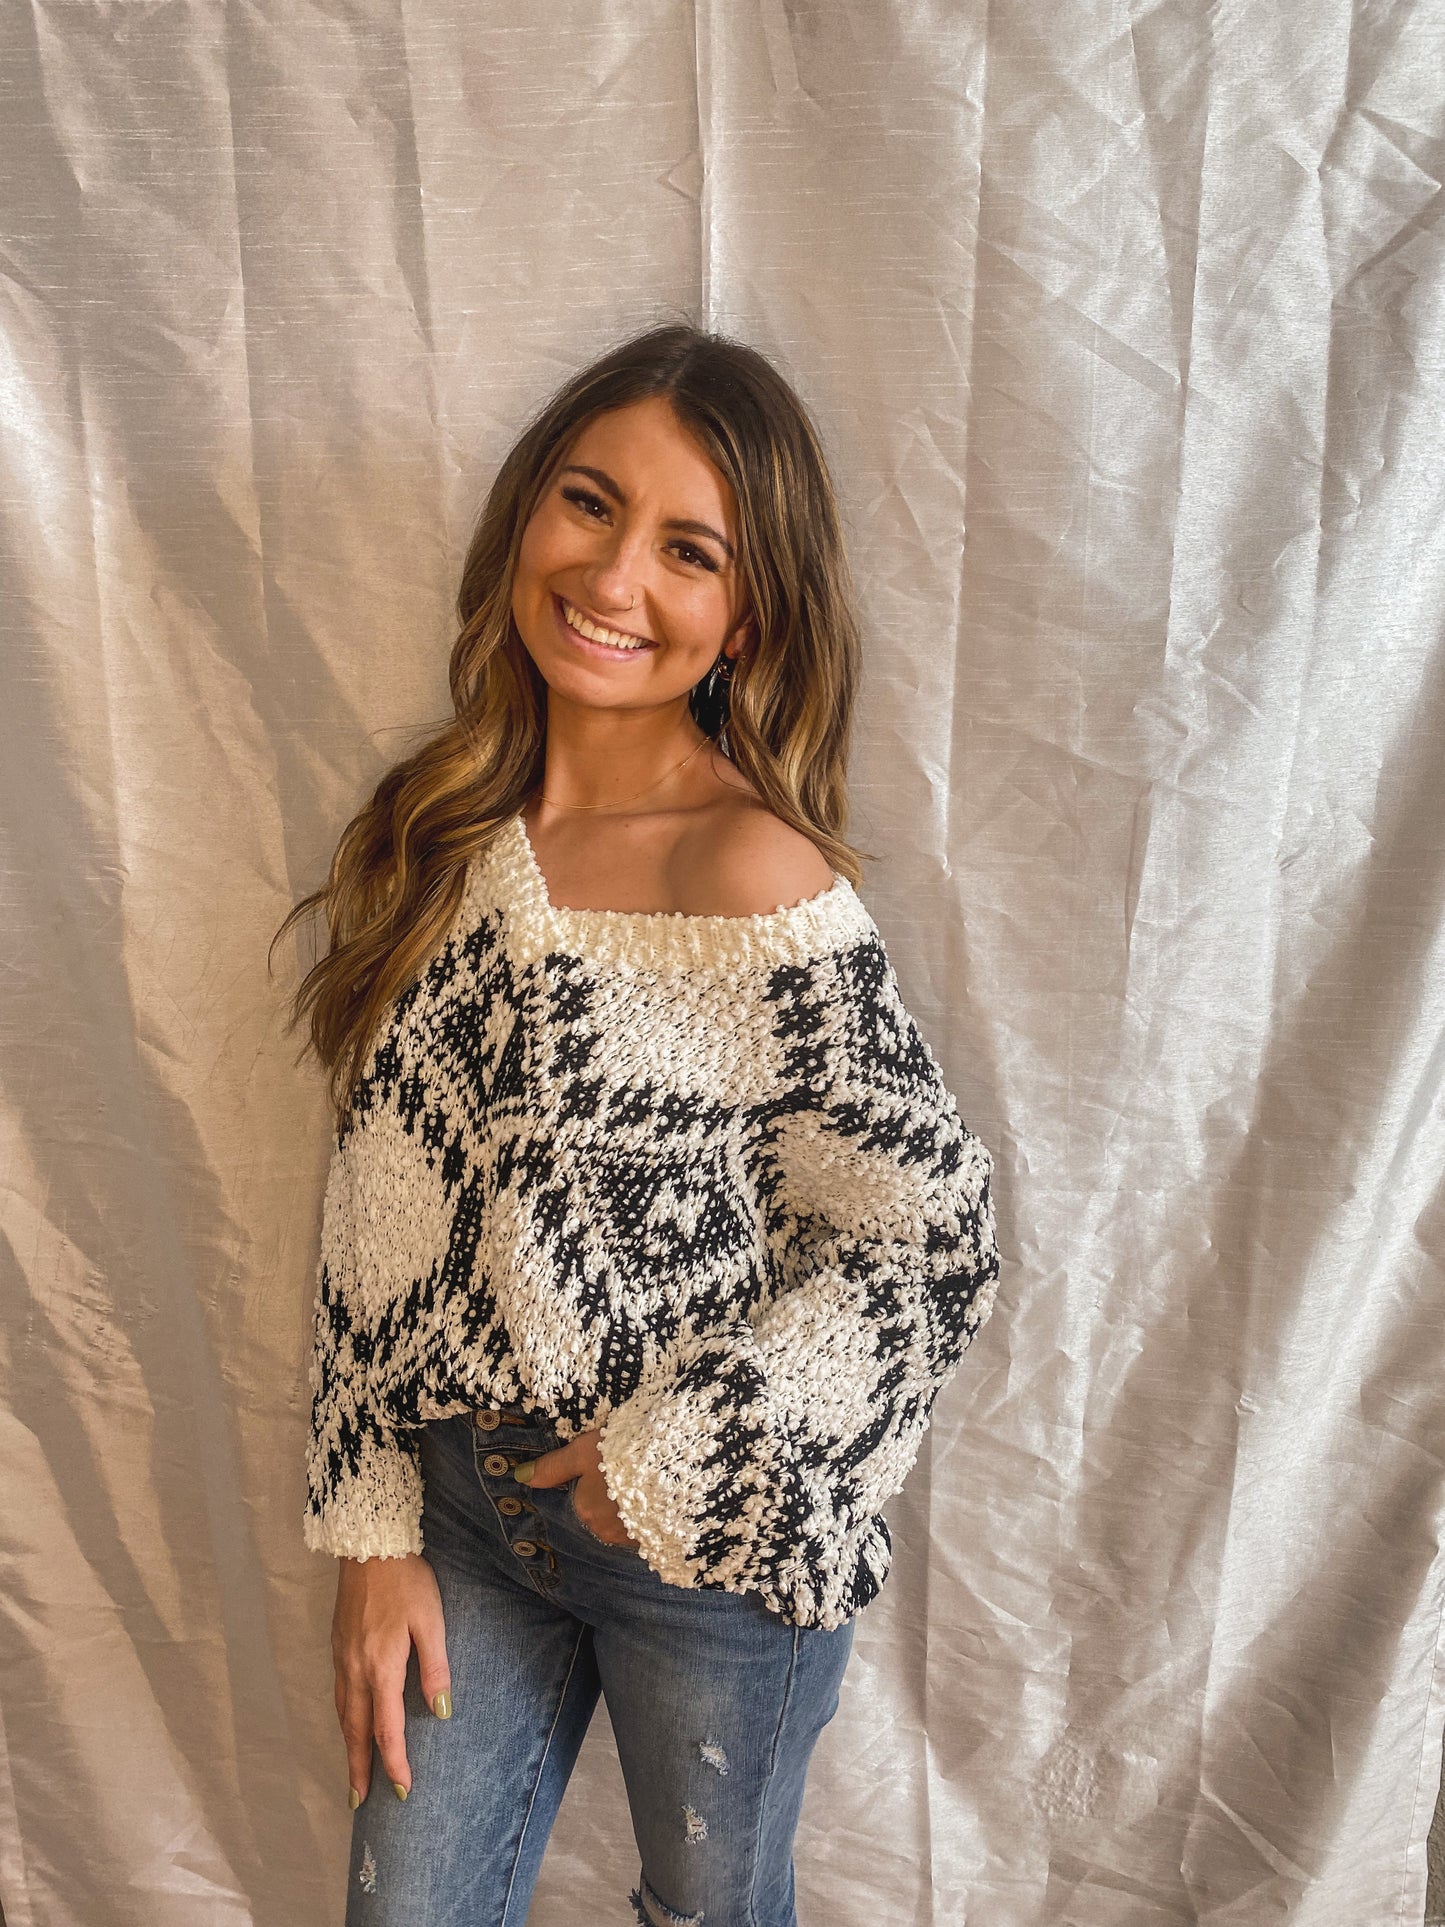 The Serenity Fuzzy Knit Distressed Sweater